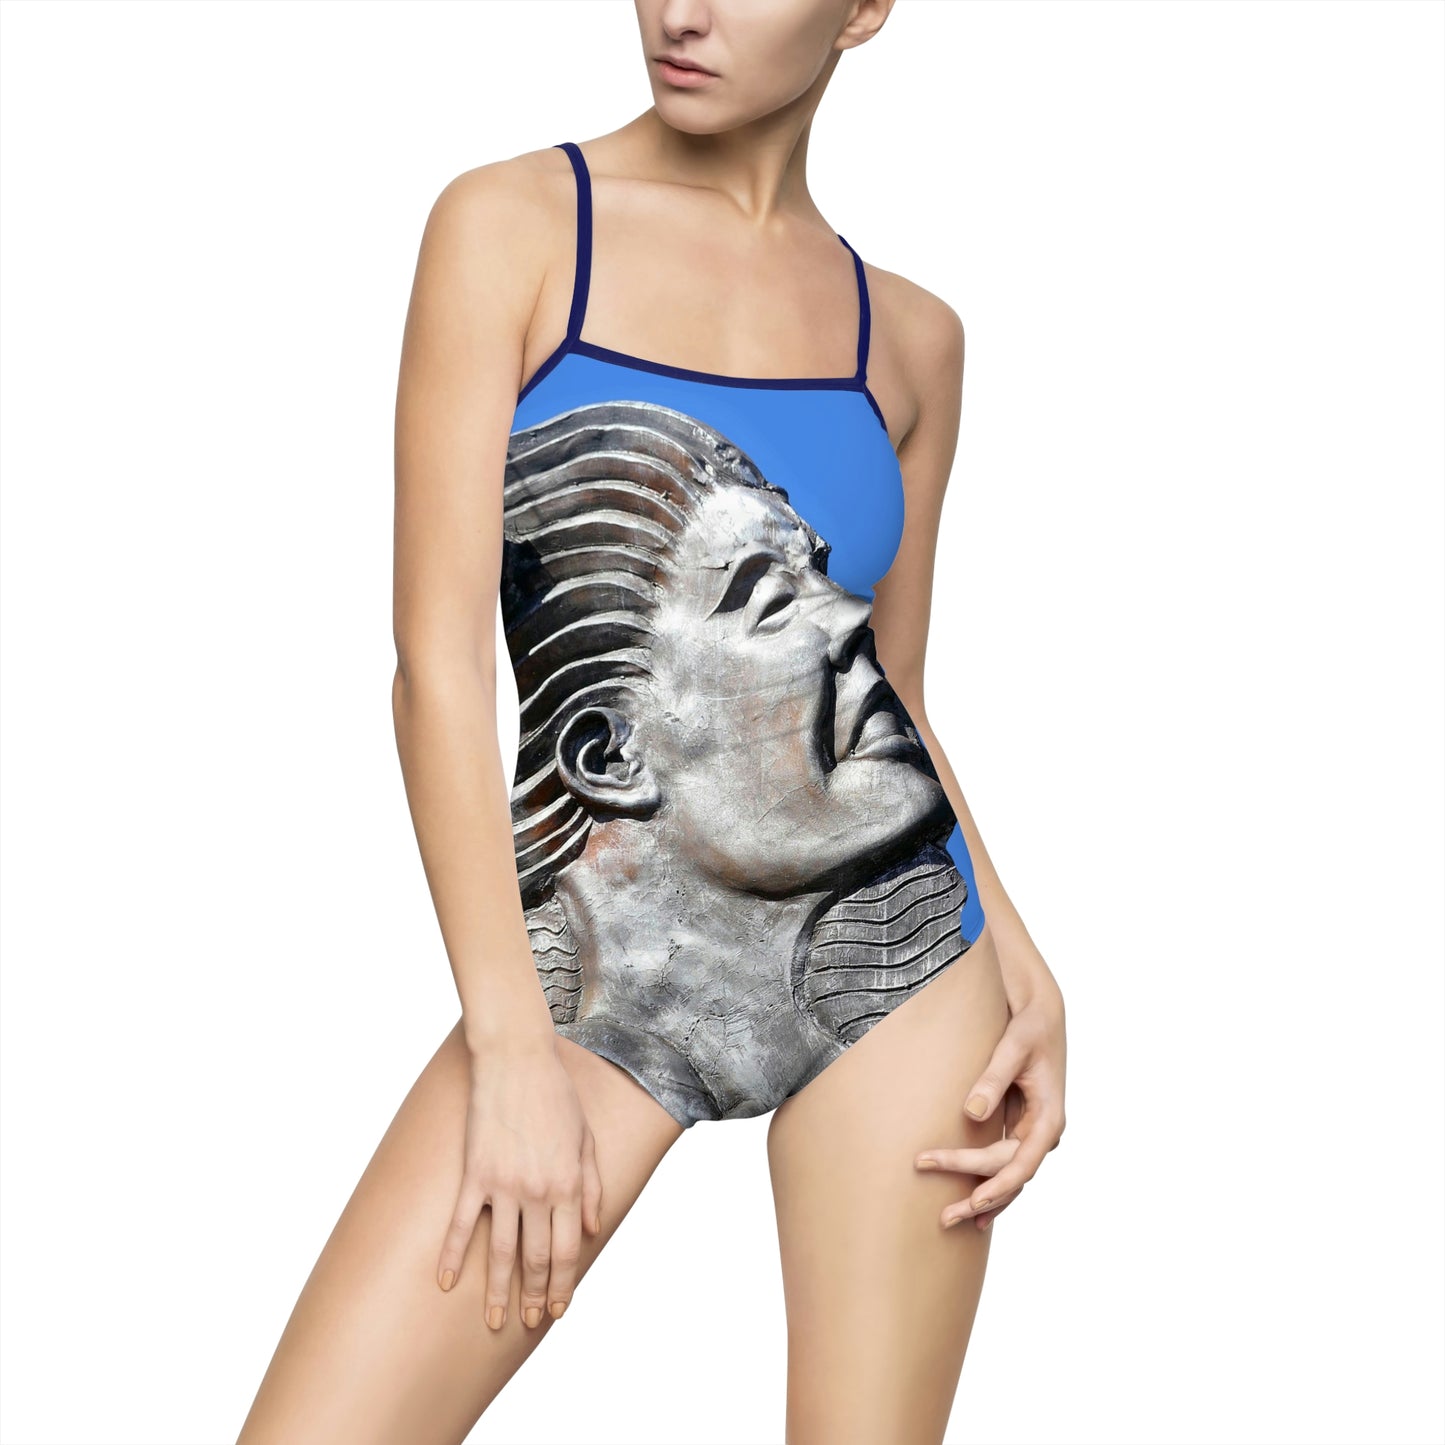 Nymph Beauty - Women's One-Piece Swimsuit - Fry1Productions